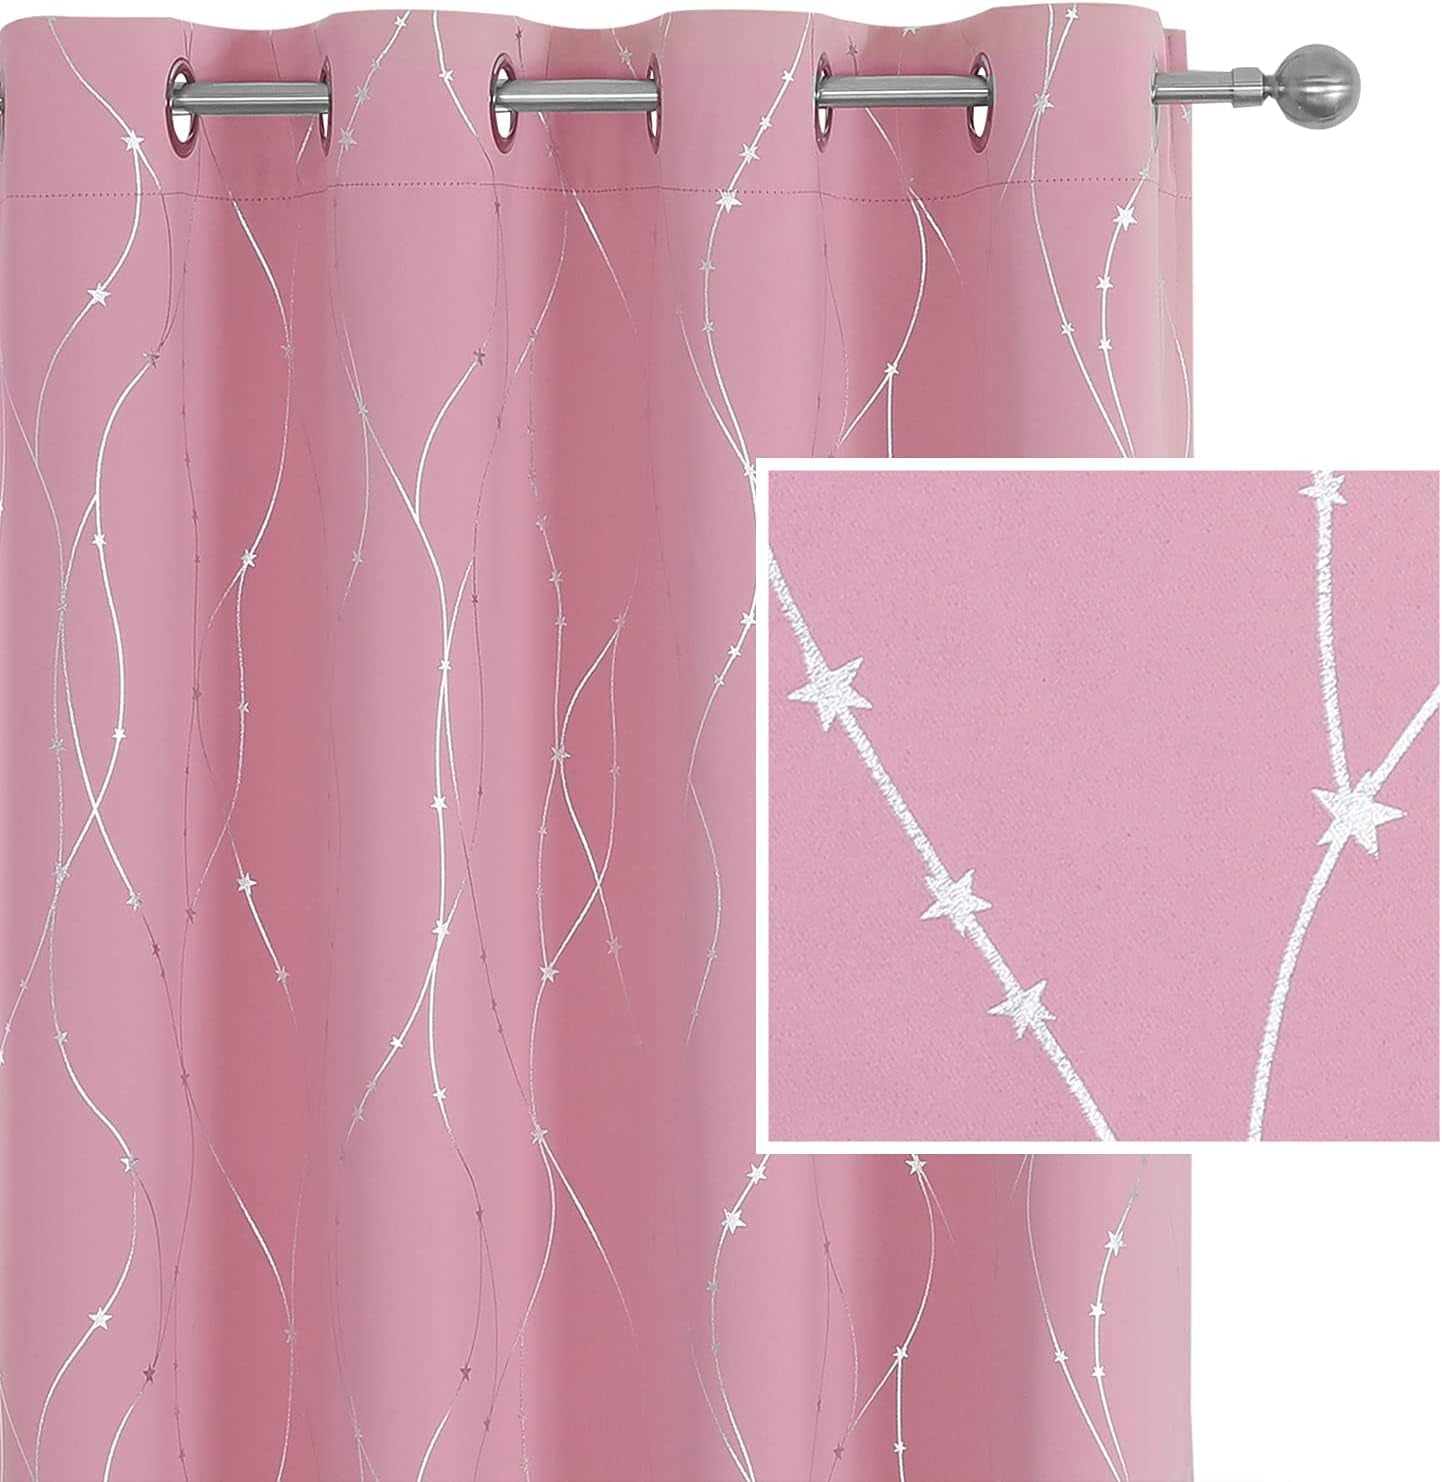 SMILE WEAVER Black Blackout Curtains for Bedroom 72 Inch Long 2 Panels,Room Darkening Curtain with Gold Print Design Noise Reducing Thermal Insulated Window Treatment Drapes for Living Room  SMILE WEAVER Pink Silver 52Wx54L 